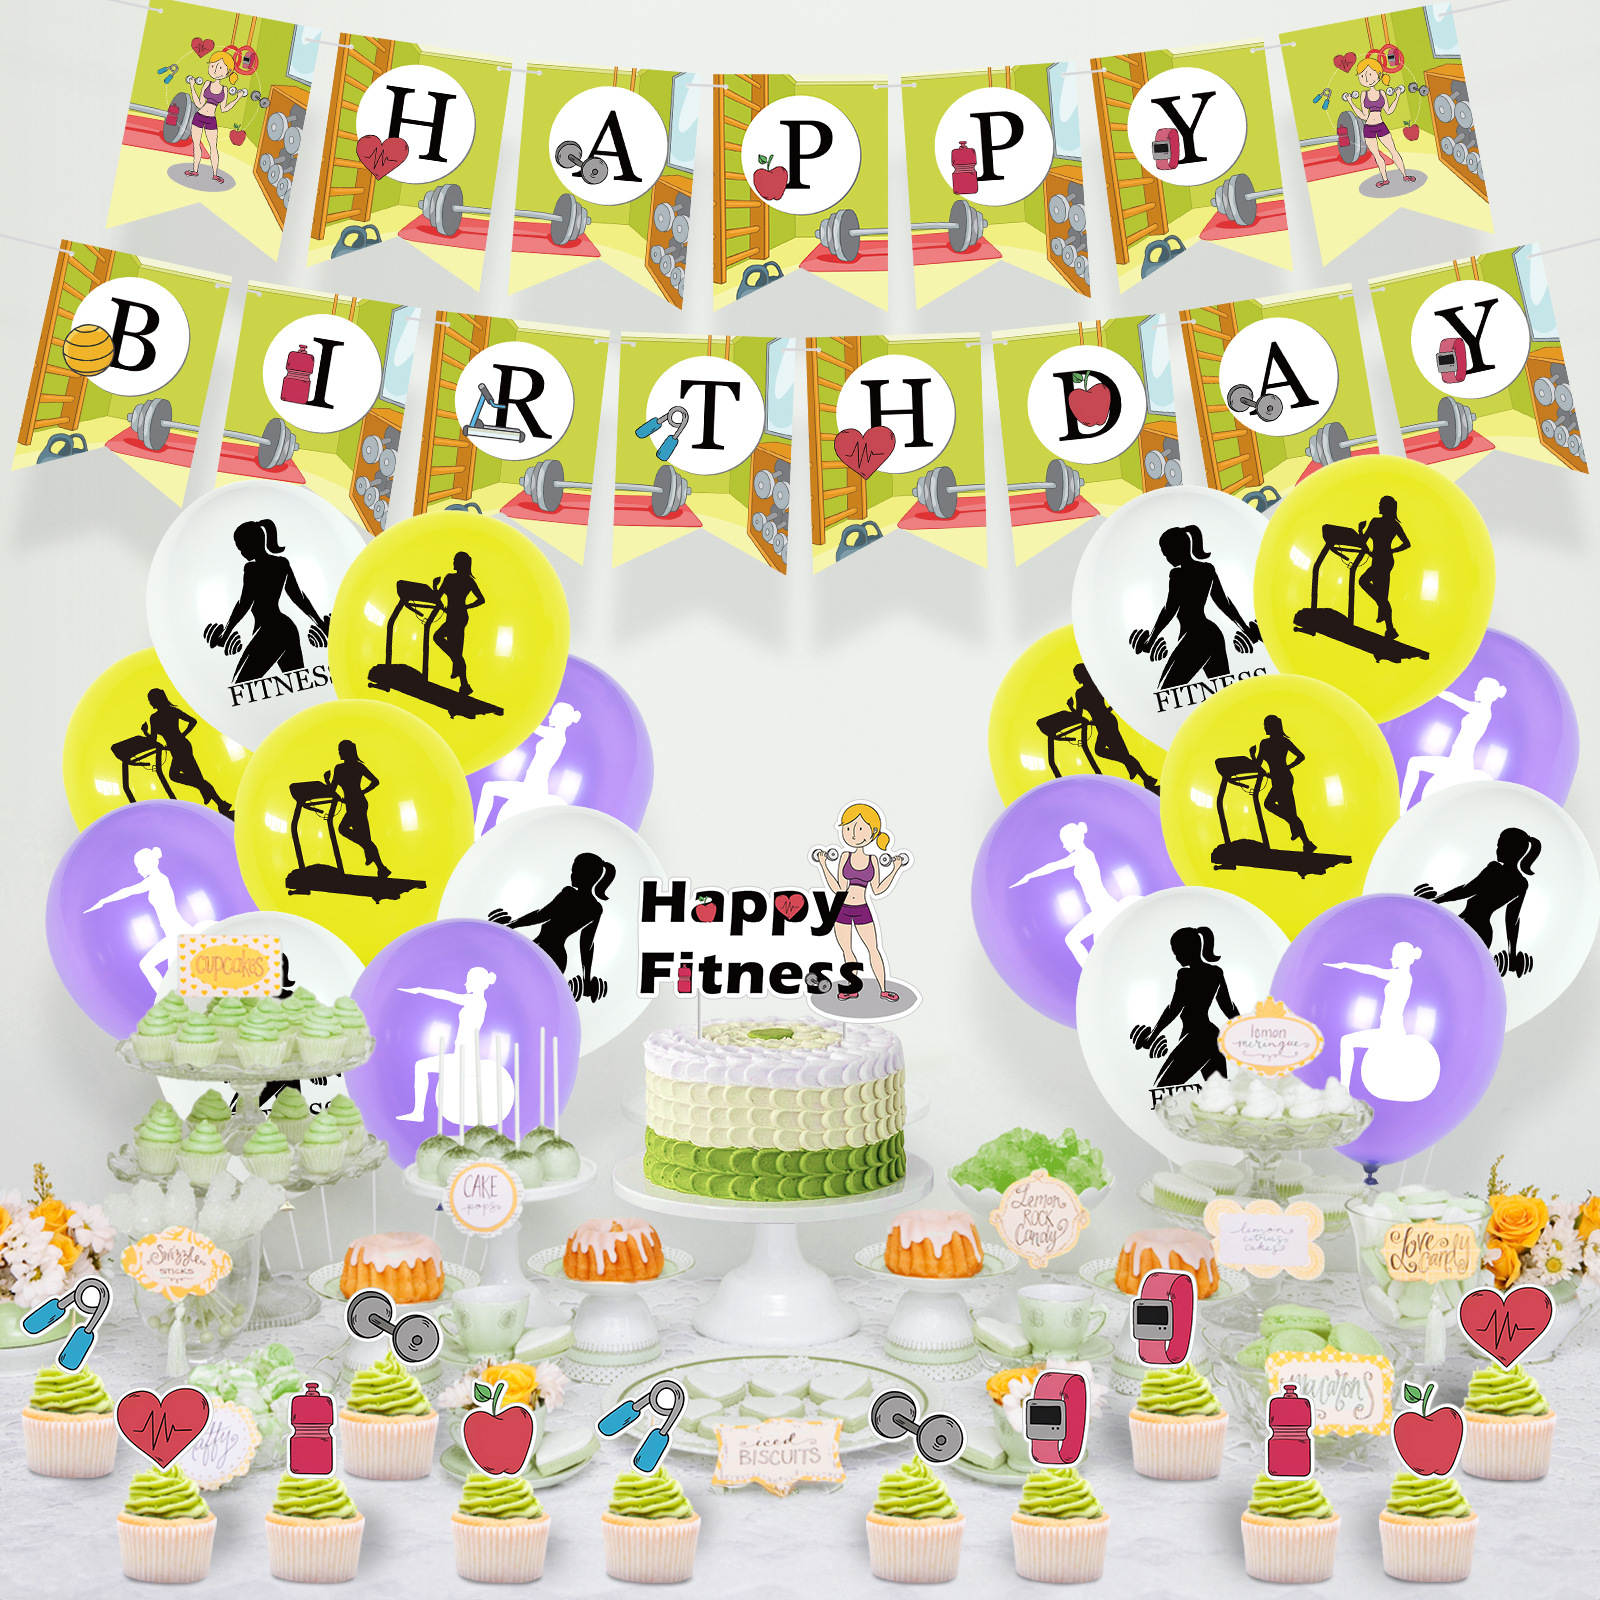 Gym Cake Decorations - Cake & Cupcake Toppers for Men Black and Gold  Fitness Cake Toppers, 25 Pcs Glitter Weight Lifting Cake Topper Decorations  for Gym Fitness Themed Birthday Party 